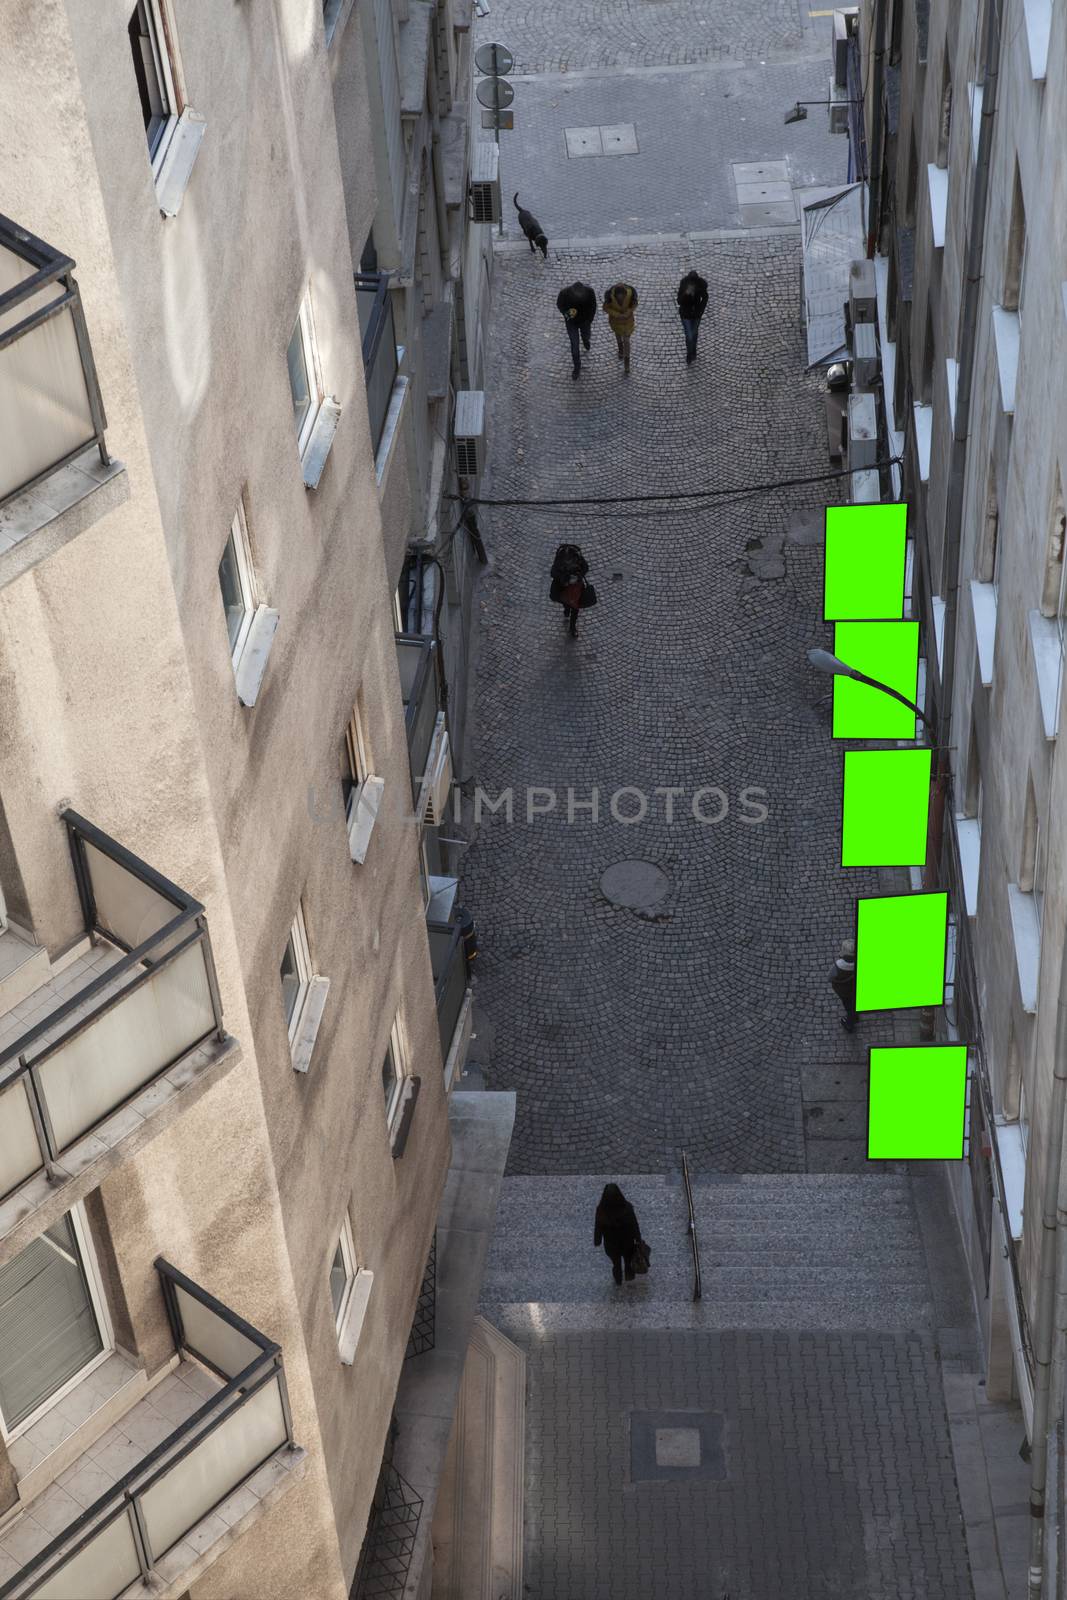 A tiny alley with billboards executed in green from above.